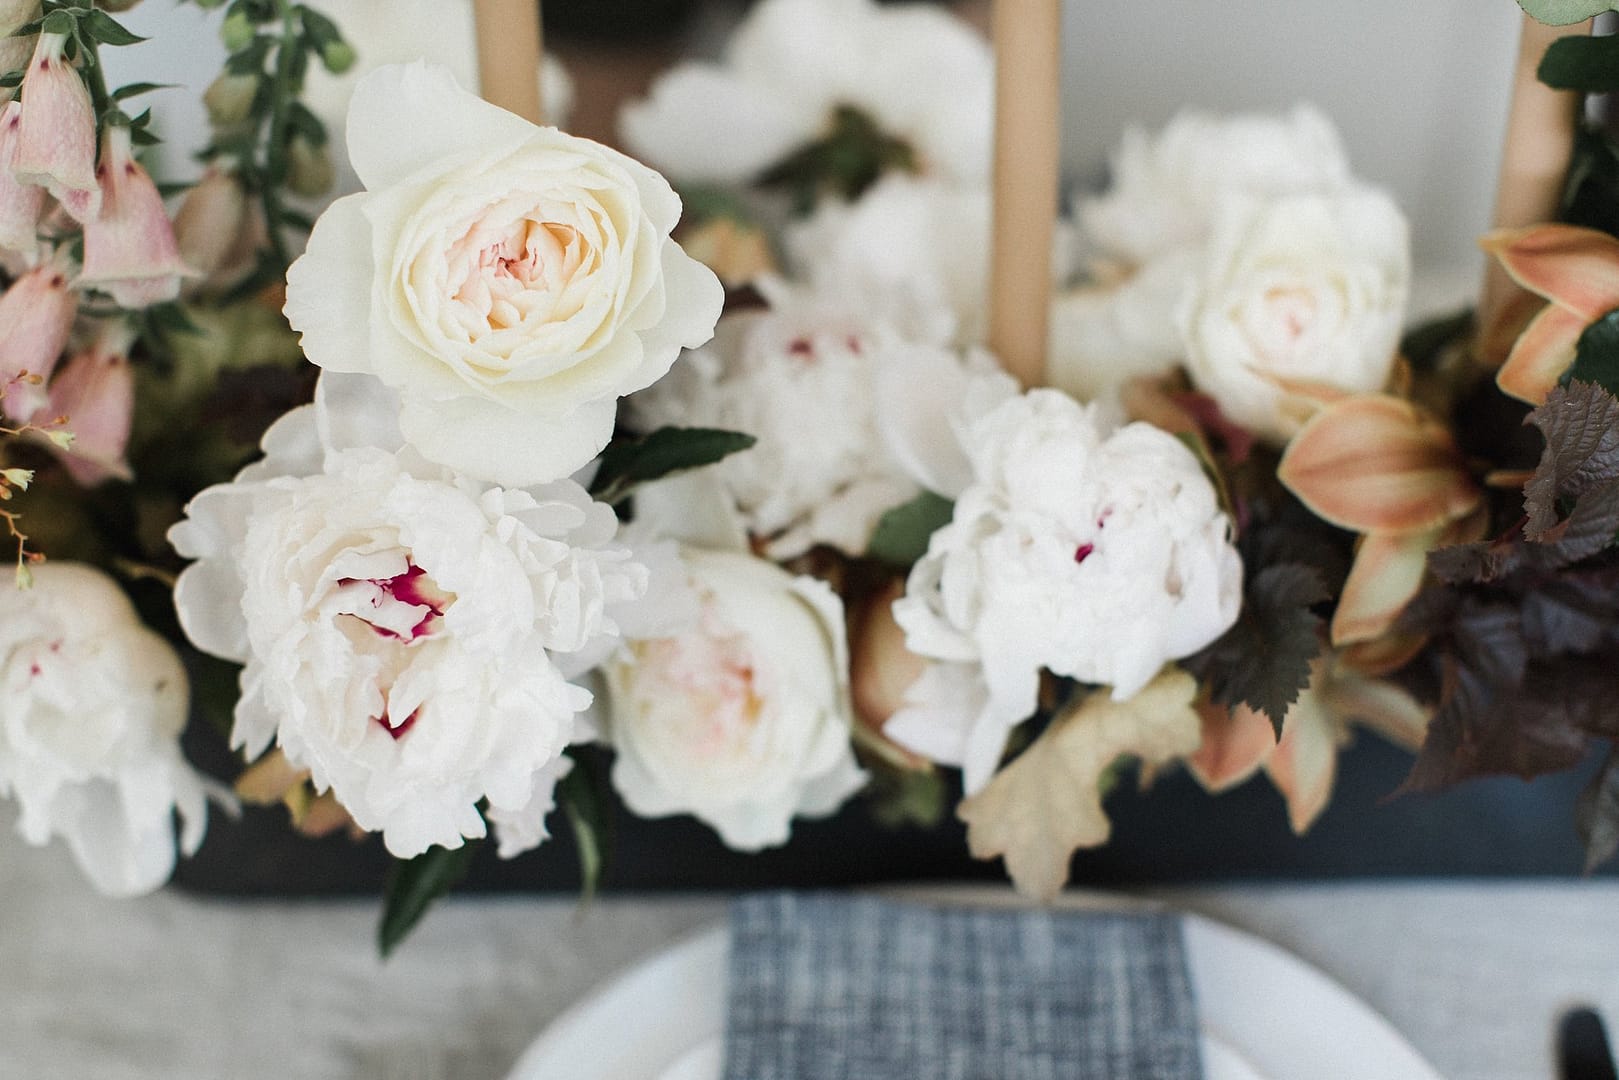 Spring peony centerpiece by Nectar and Root, Vermont wedding florist at Foxfire Mountain House in the Catskills, New York.